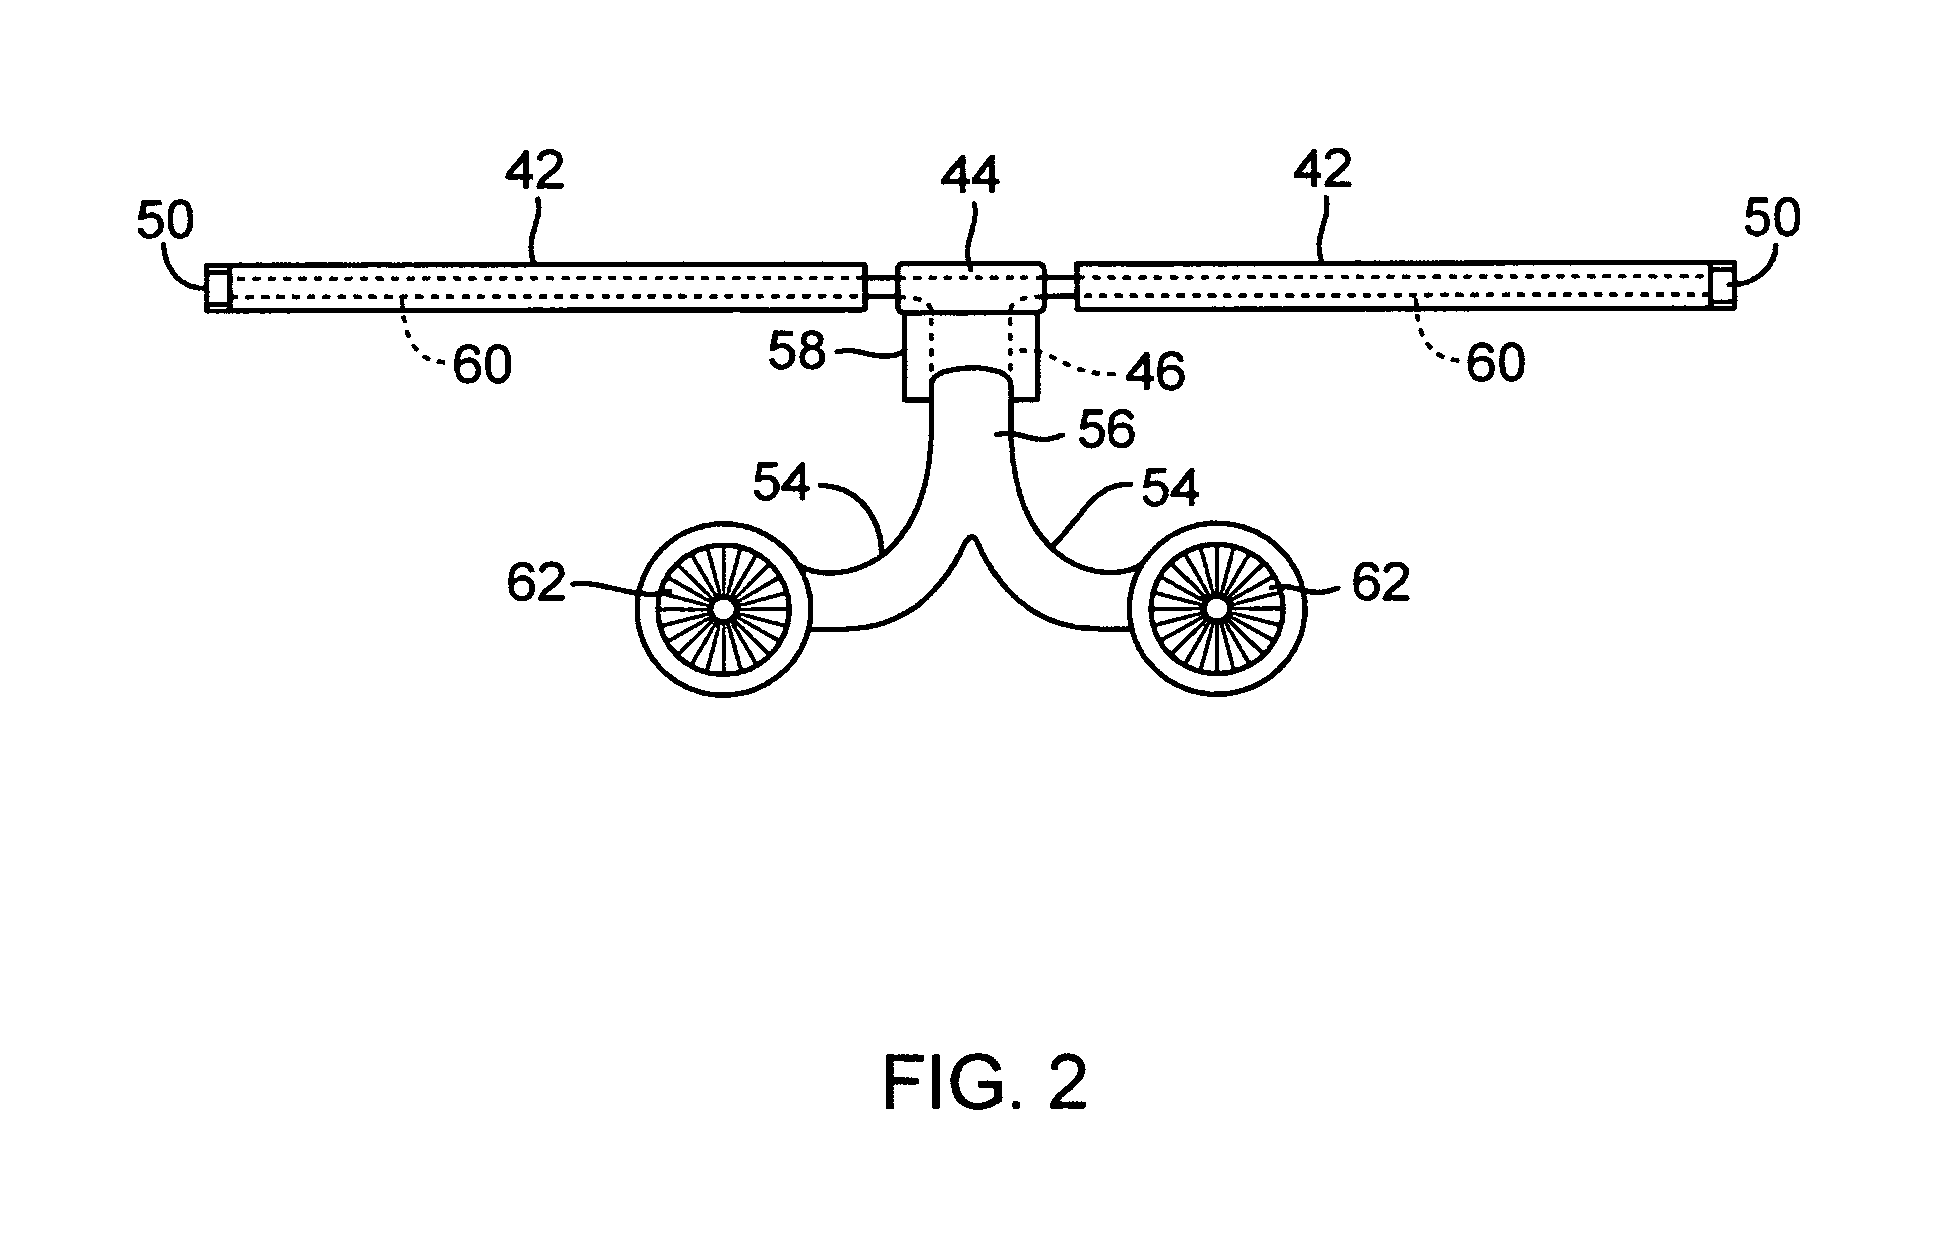 Apparatus and method for roll moment equalization at high advance ratios for rotary wing aircraft